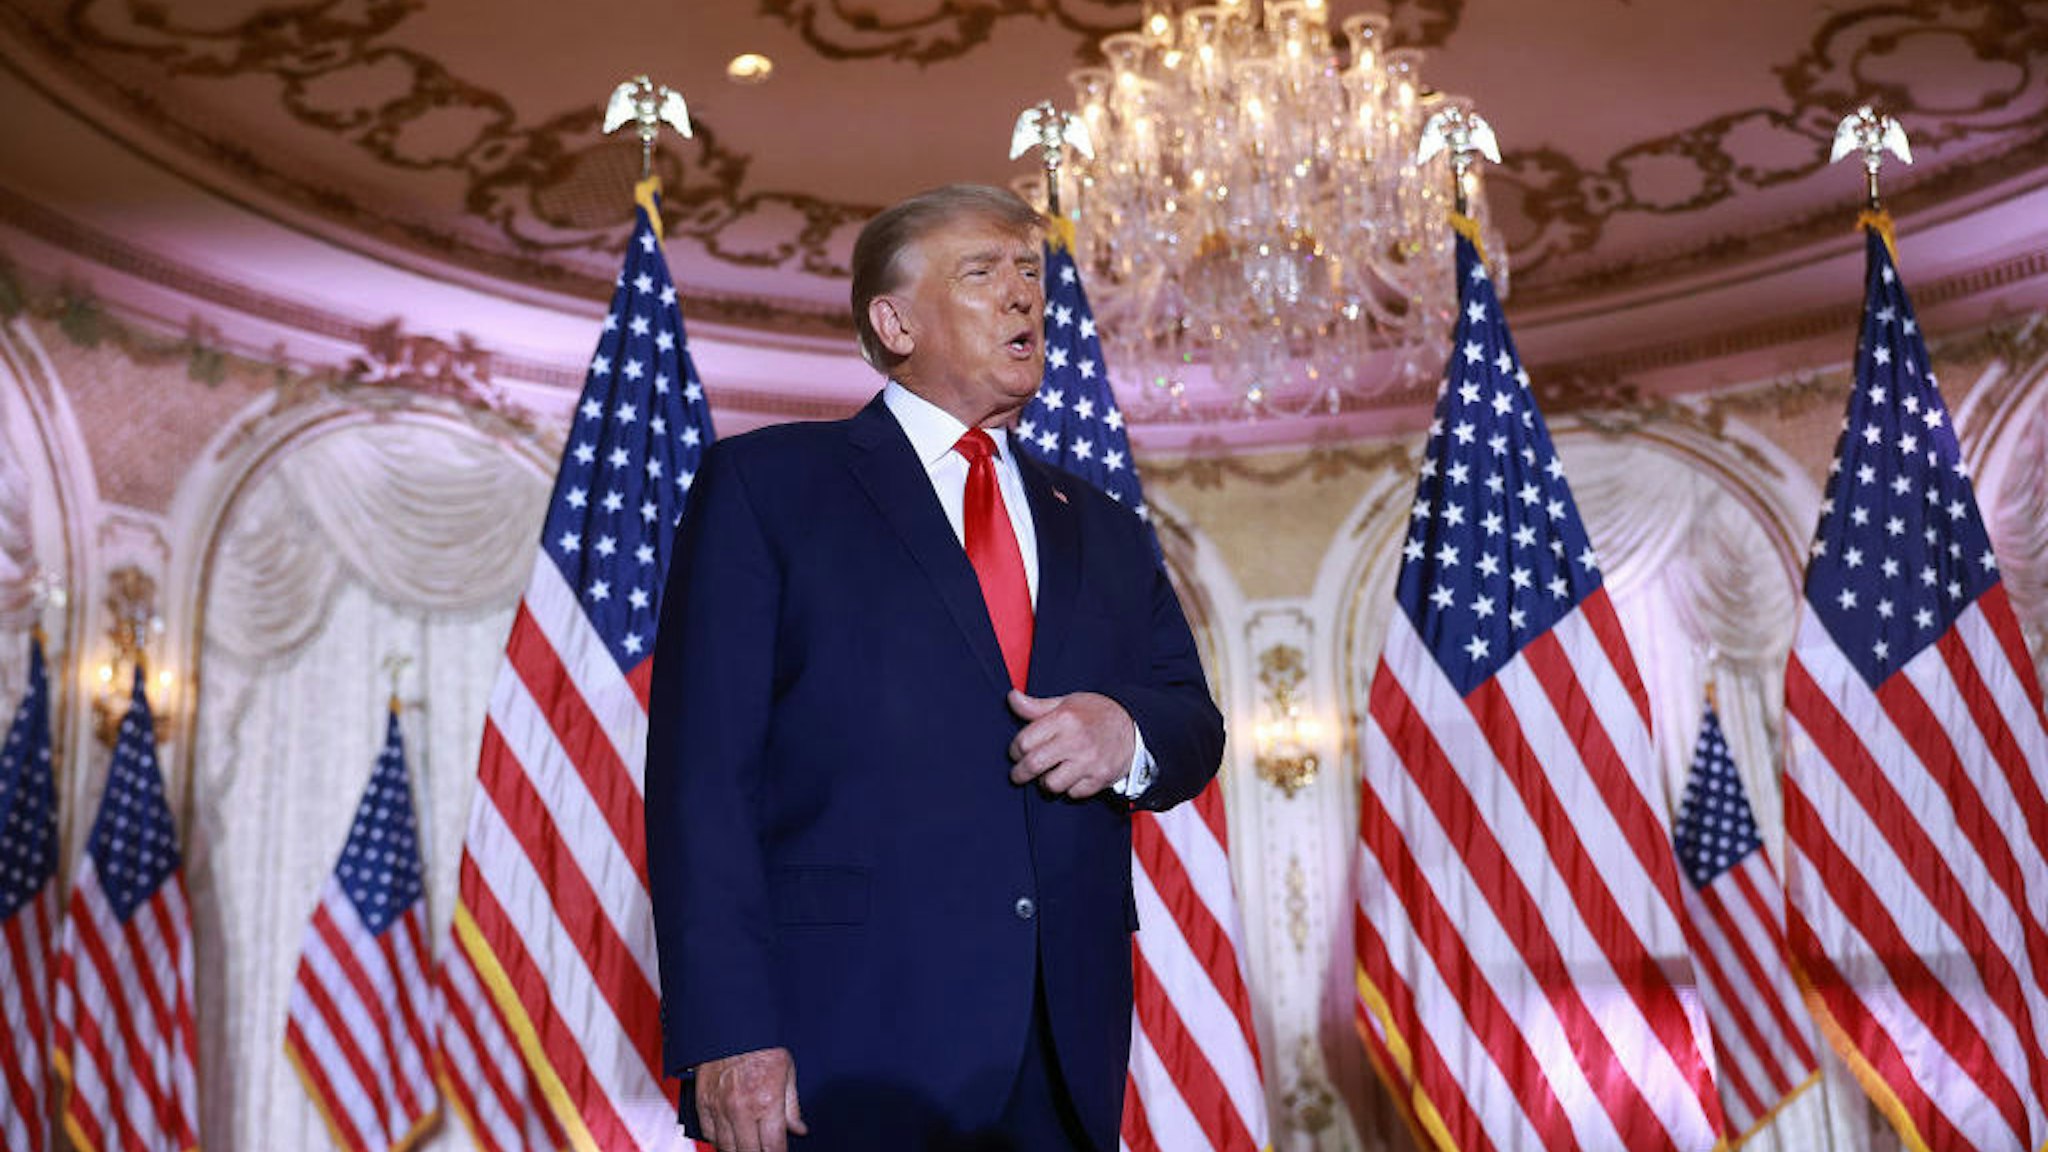 PALM BEACH, FLORIDA - NOVEMBER 15: Former U.S. President Donald Trump arrives on stage to speak during an event at his Mar-a-Lago home on November 15, 2022 in Palm Beach, Florida. Trump announced that he was seeking another term in office and officially launched his 2024 presidential campaign. (Photo by Joe Raedle/Getty Images)